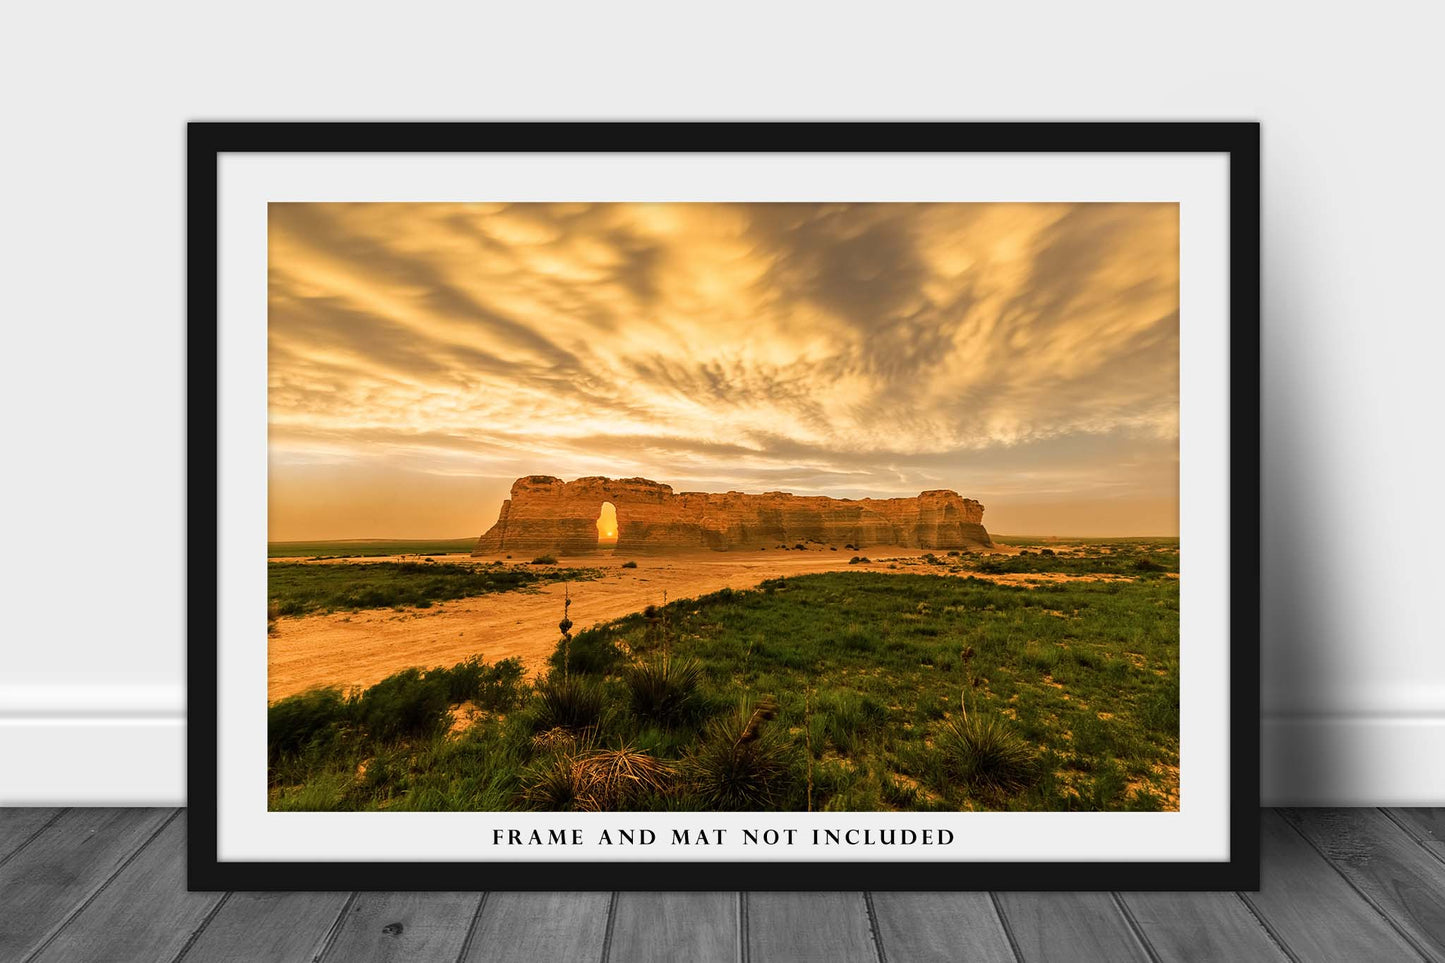 Great Plains Photography Print (Not Framed) Picture of Monument Rocks Under Stormy Sky at Sunset in Kansas Prairie Wall Art Western Decor